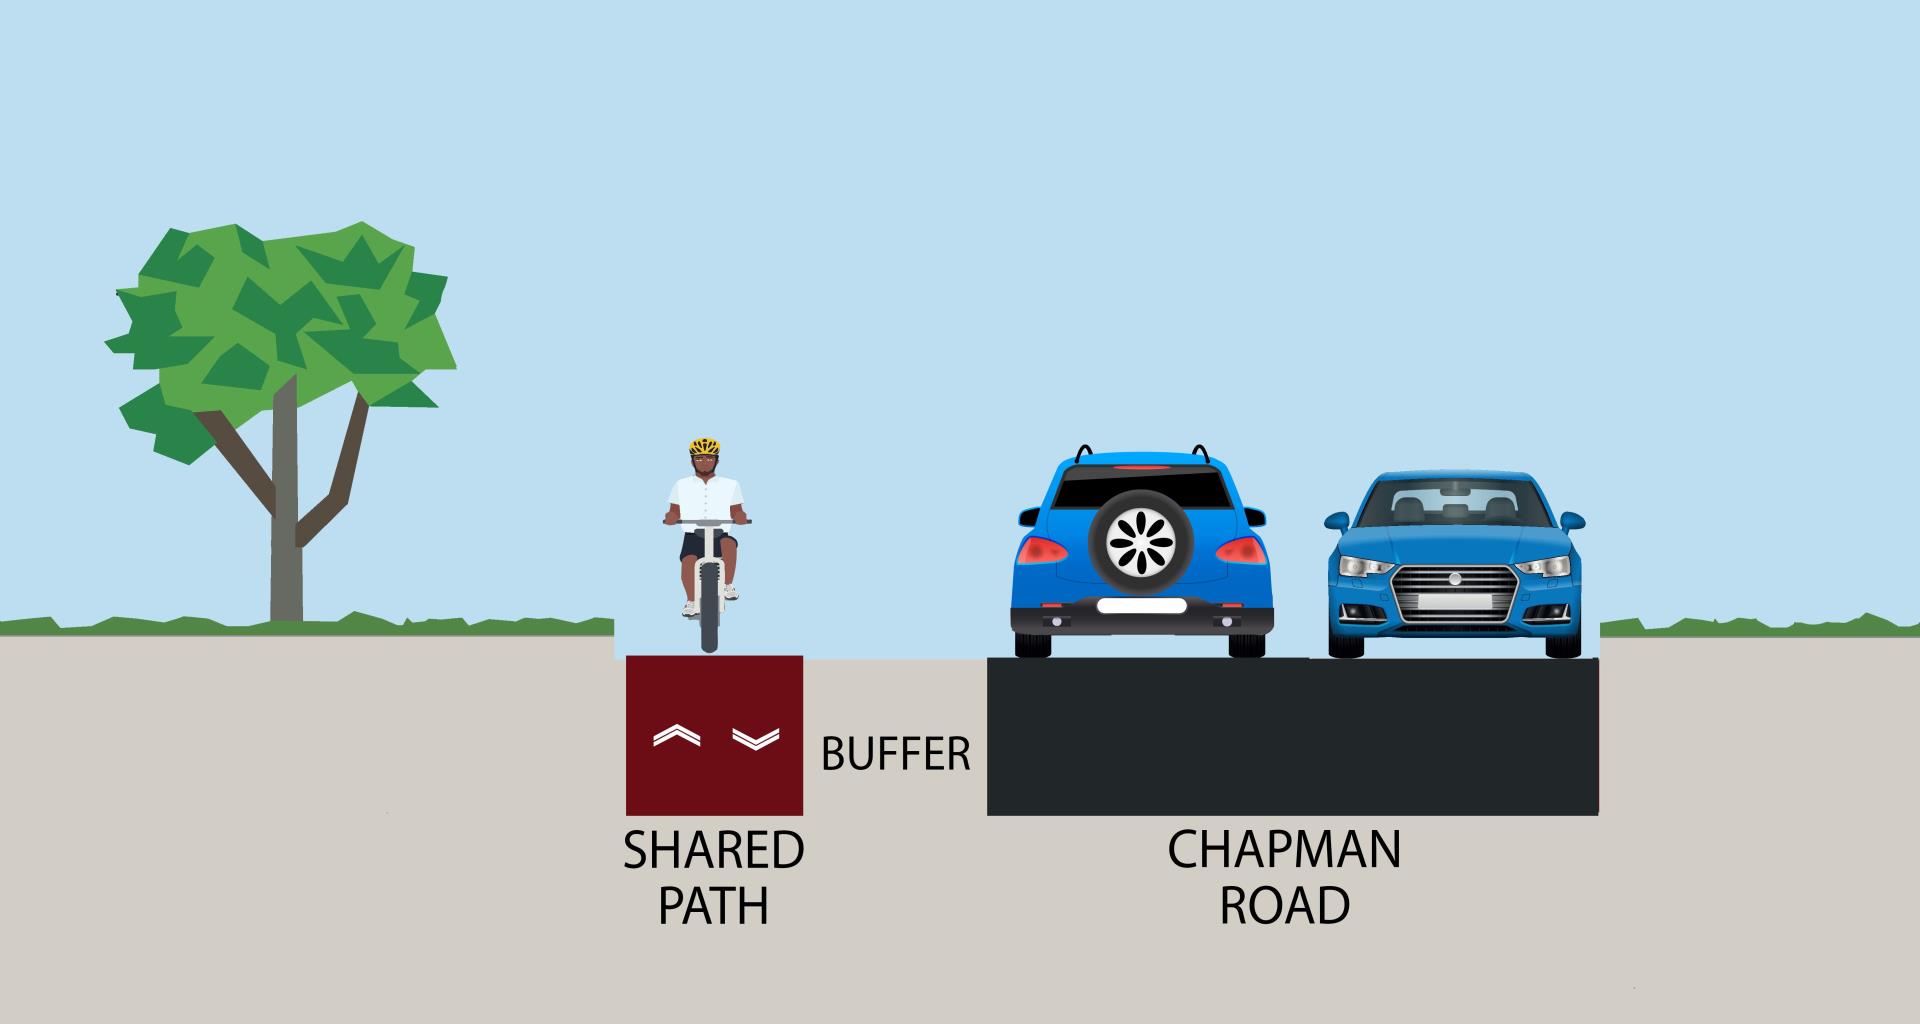 Cross section of shared path and Chapman Road